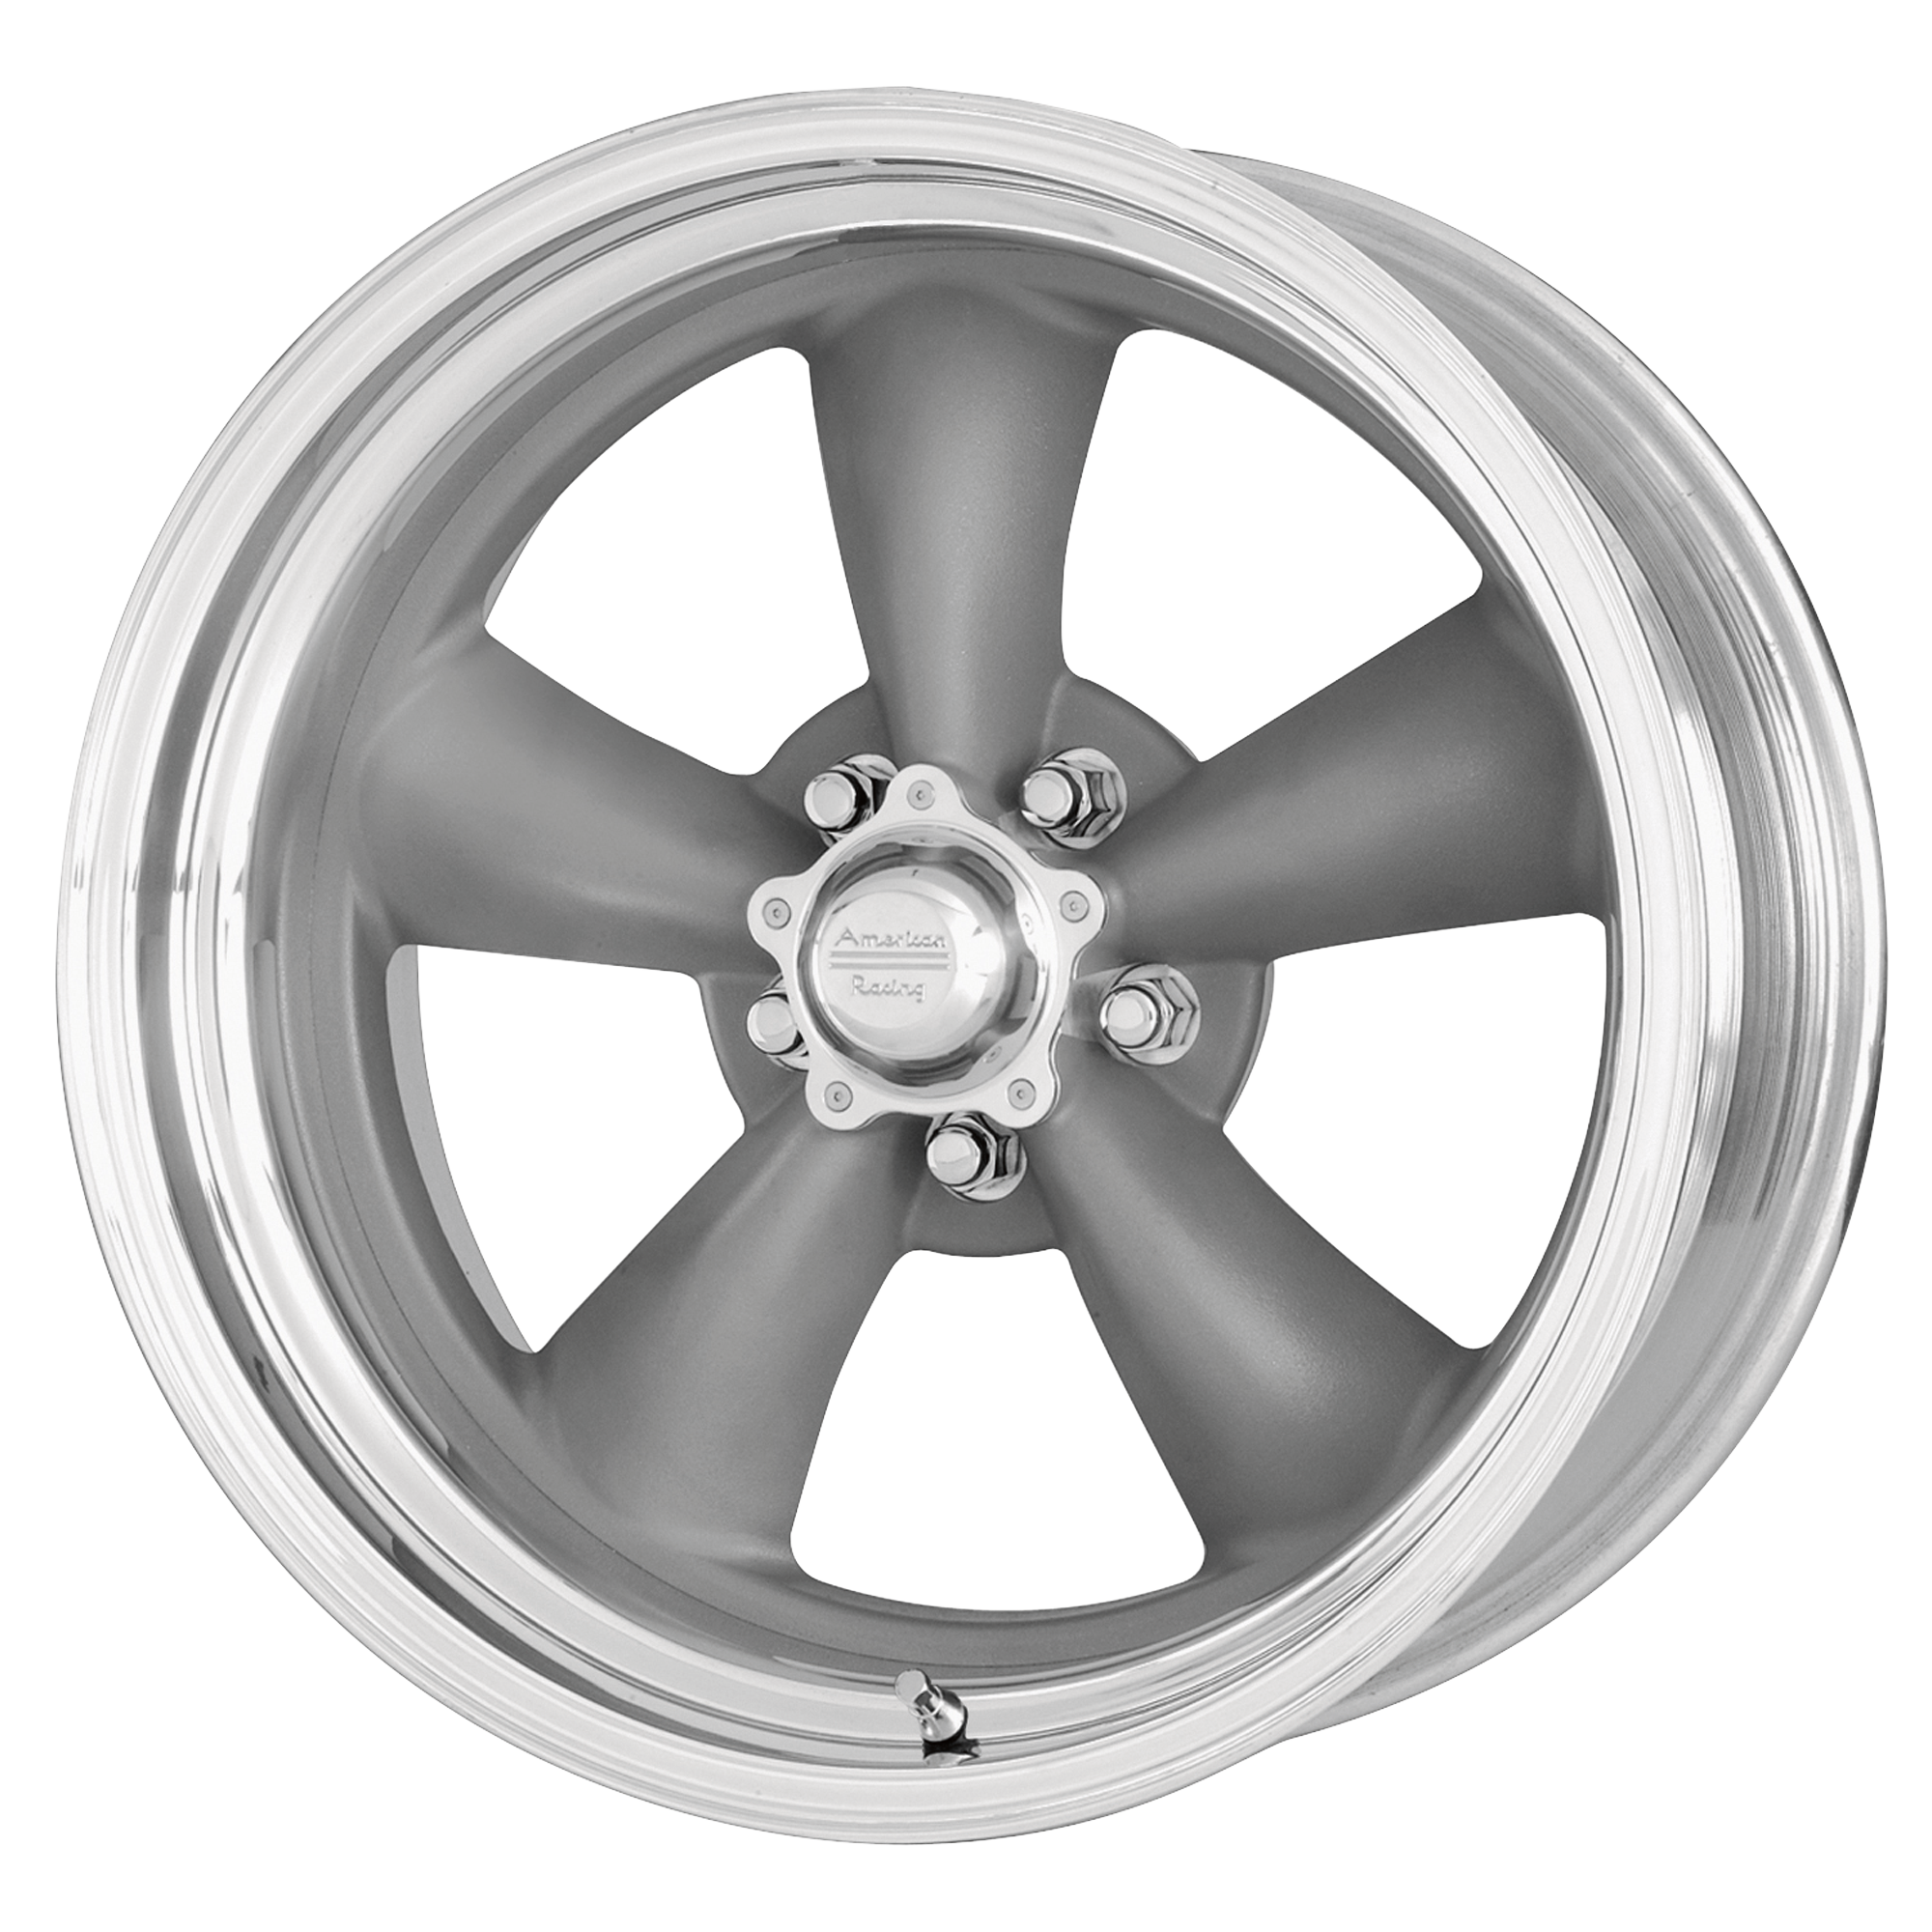 CLASSIC TORQ THRUST II ONE PIECE 15x6 5x114.30 MAG GRAY W/ MACHINED LIP (-6 mm) - Tires and Engine Performance